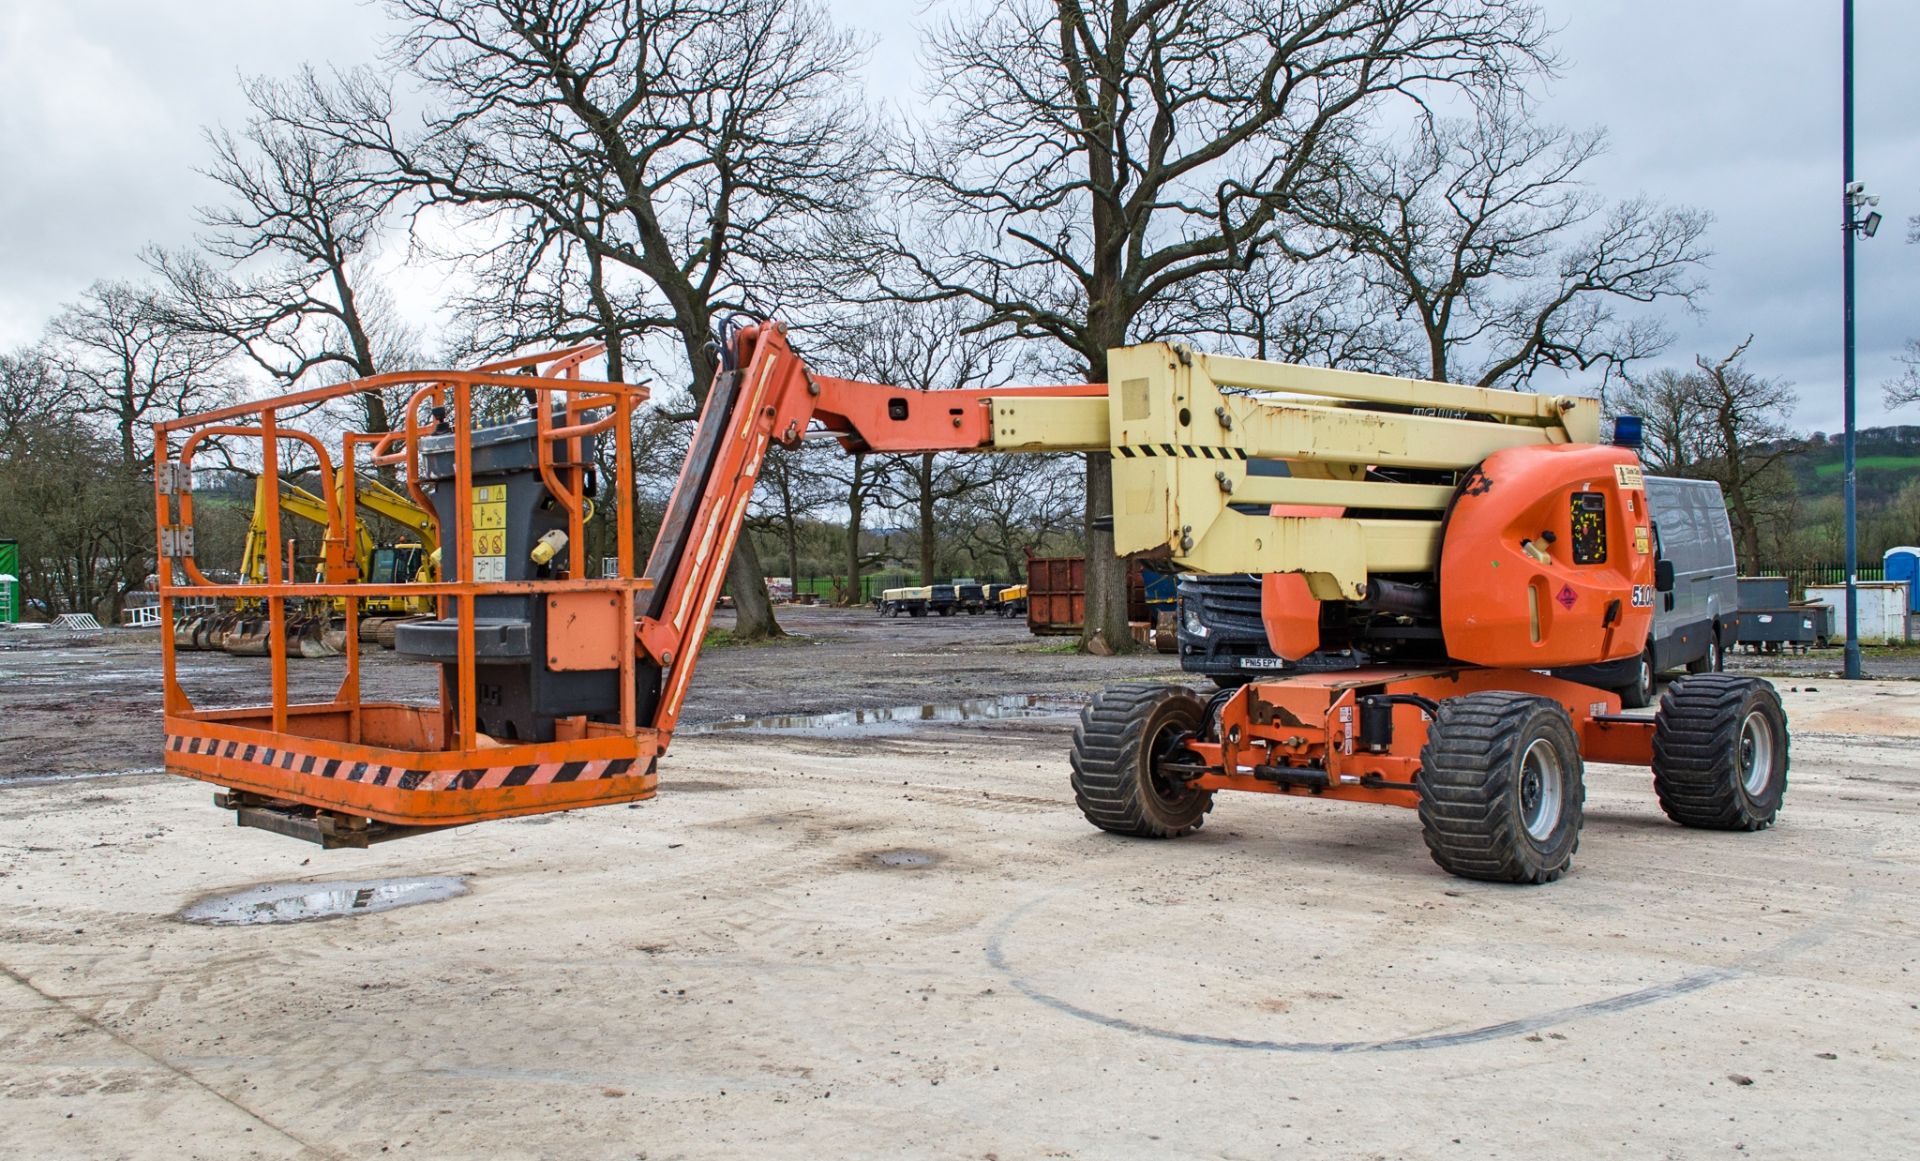 JLG 510AJ diesel driven articulated boom access platform Year: 2015 S/N: E300002191 Recorded